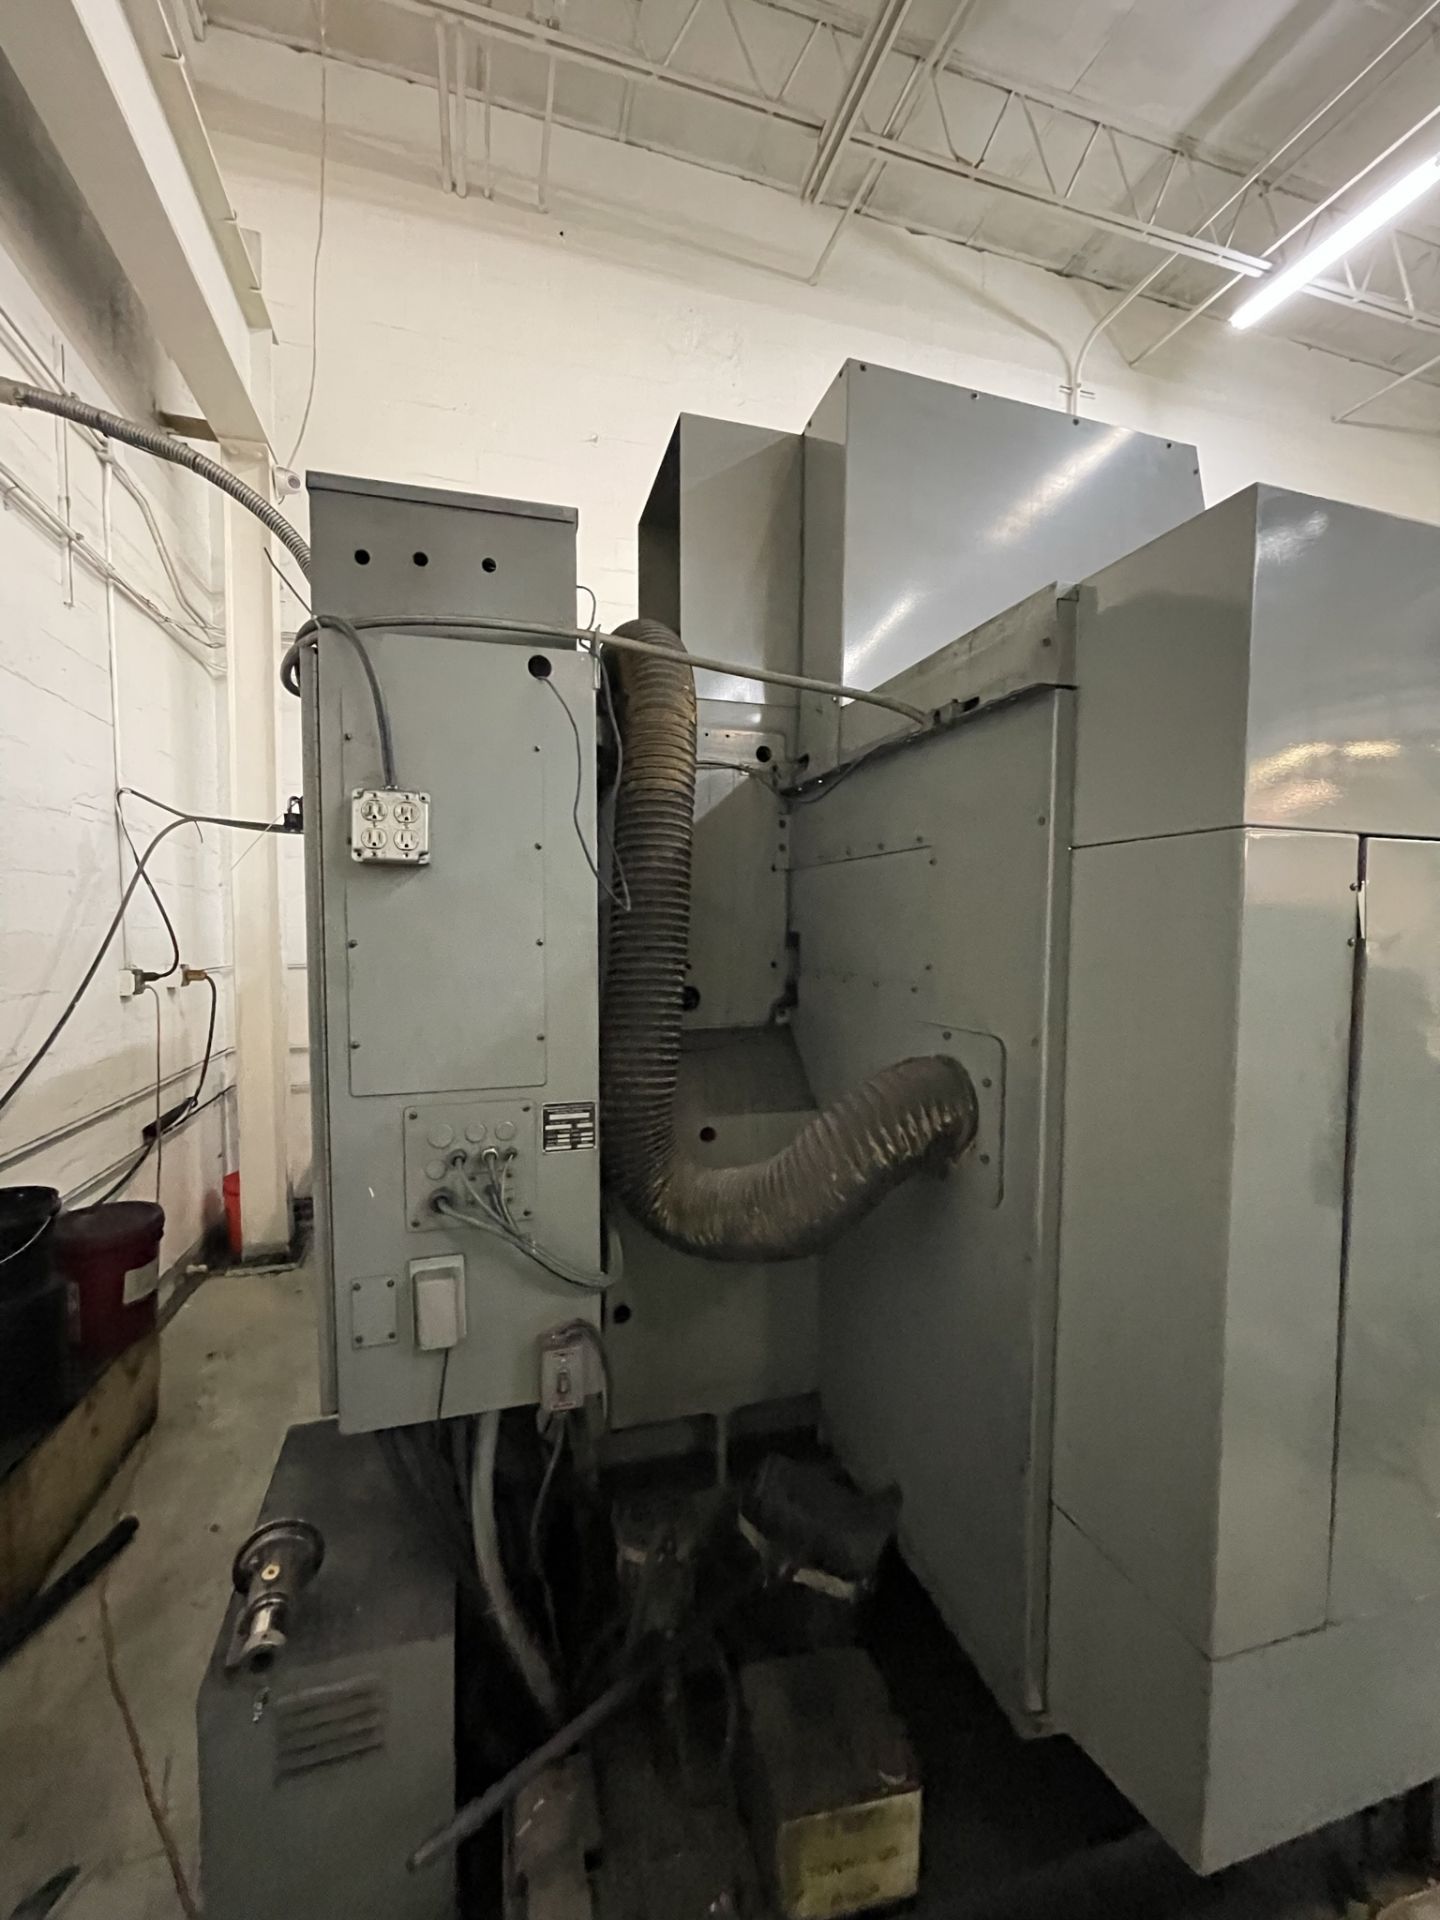 1995 Bostomatic BD32-G CNC Vertical Machining Center - Image 6 of 7